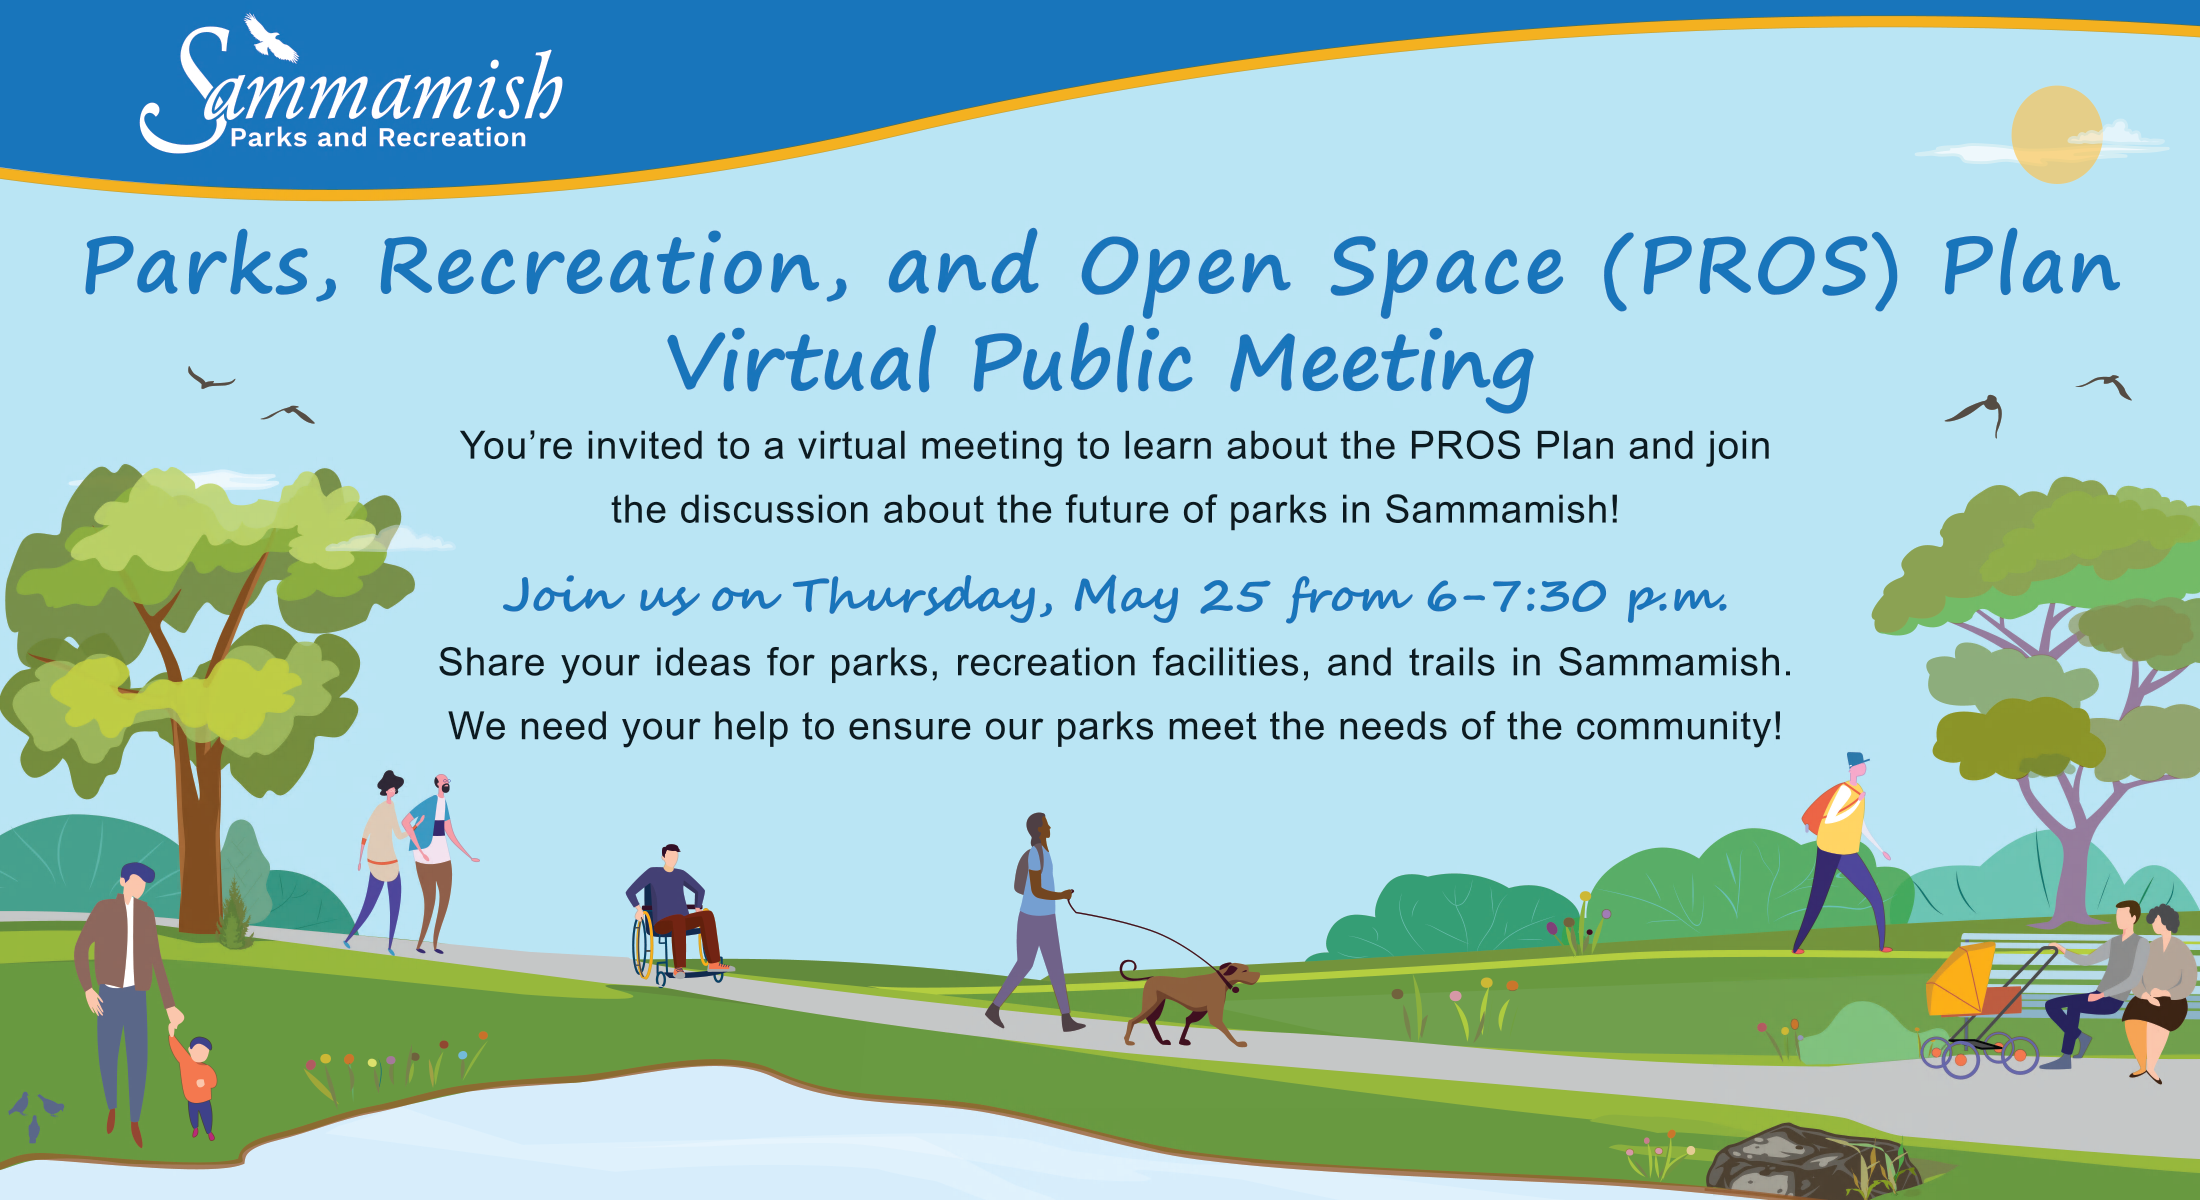 Image says: Parks, Recreation, and Open Space (PROS) Plan Virtual Public Meeting, You’re invited to a virtual meeting to learn about the PROS Plan and join the discussion about the future of parks in Sammamish! Join us on Thursday, May 25 from 6 – 7:30 p.m. Share your ideas for parks, recreation facilities, and trails in Sammamish. We need your help to ensure our parks meet the needs of the community! The illustration is of several people enjoying a vegetation-filled park with a paved path. 